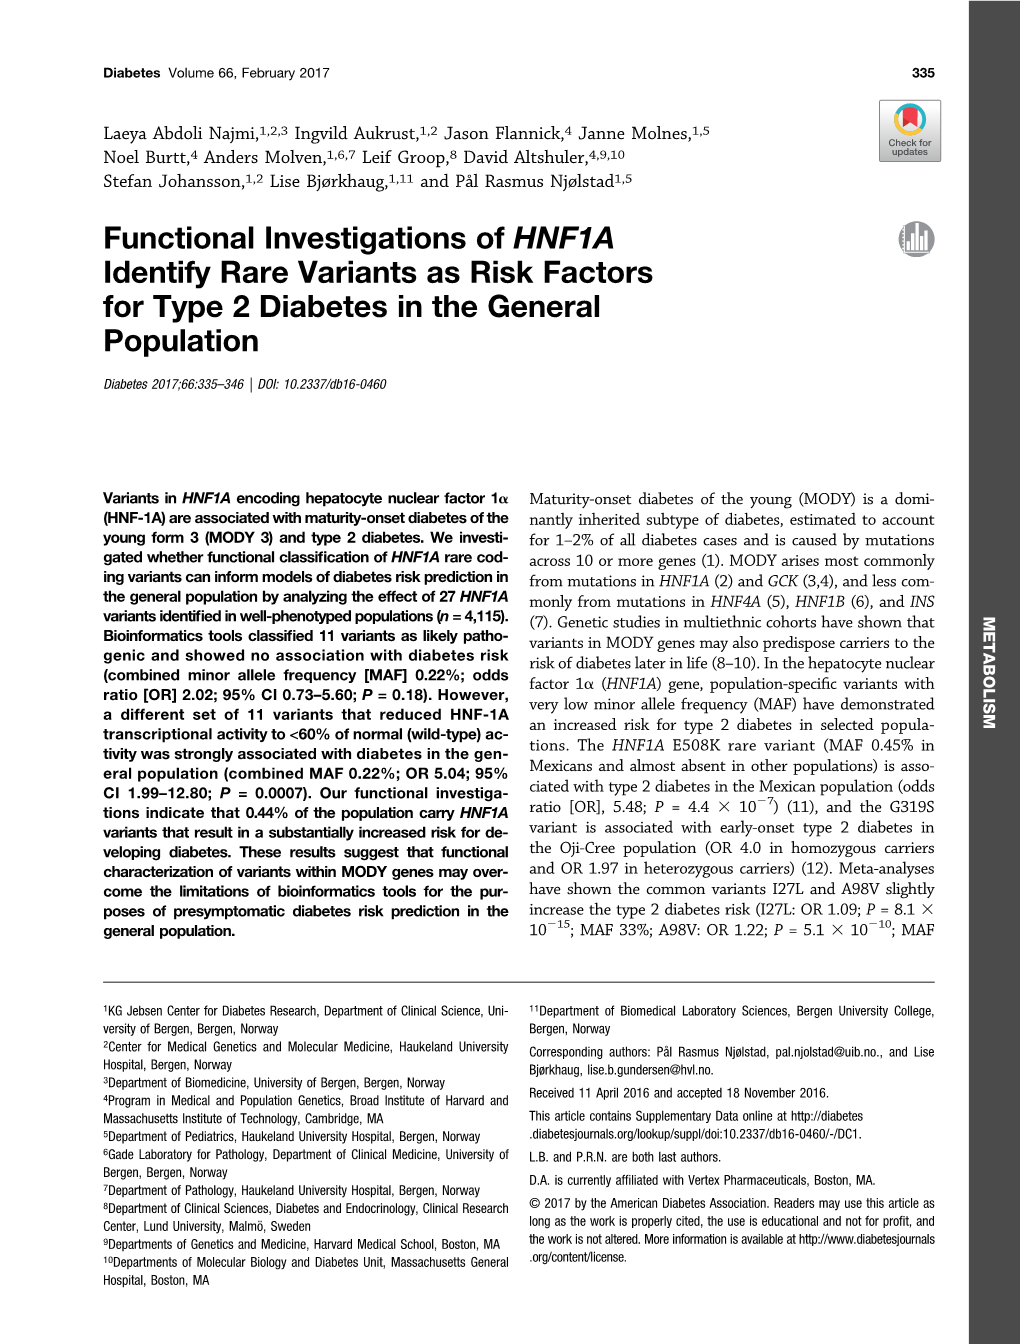 Functional Investigations of HNF1A Identify Rare Variants As Risk Factors for Type 2 Diabetes in the General Population